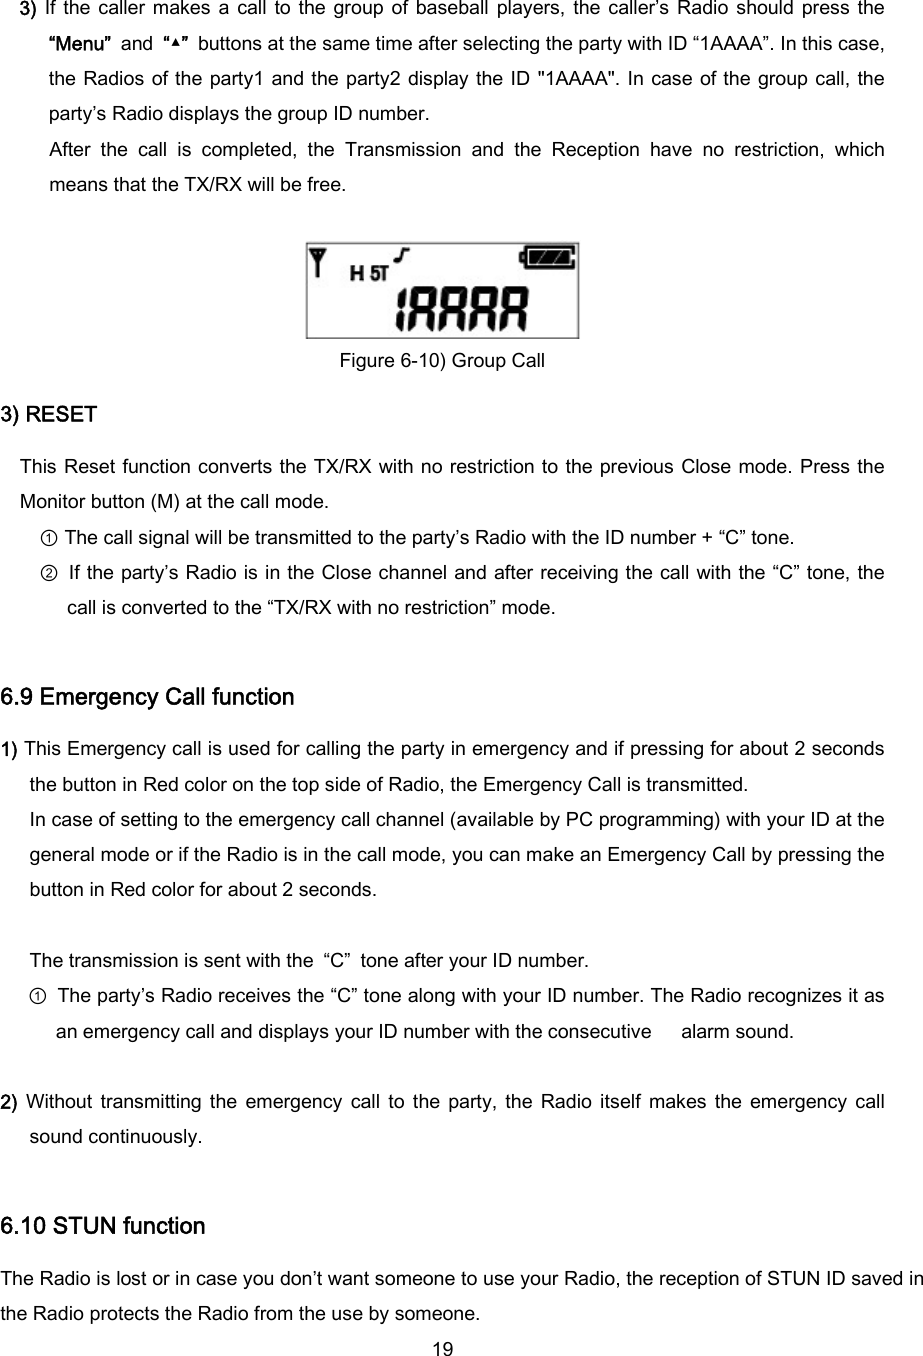  19 3) If the  caller  makes  a call  to  the  group  of  baseball  players,  the  caller’s  Radio  should  press  the “Menu” and “▲”  buttons at the same time after selecting the party with ID “1AAAA”. In this case, the Radios of the party1 and the party2 display the ID &quot;1AAAA&quot;. In  case of the group  call, the party’s Radio displays the group ID number.   After  the  call  is  completed,  the  Transmission  and  the  Reception  have  no  restriction,  which means that the TX/RX will be free.   Figure 6-10) Group Call 3) RESET This Reset  function  converts the TX/RX  with no restriction to the previous Close mode. Press the Monitor button (M) at the call mode. ① The call signal will be transmitted to the party’s Radio with the ID number + “C” tone. ② If the party’s Radio is in the Close channel and after receiving the call with the “C” tone, the call is converted to the “TX/RX with no restriction” mode.   6.9 Emergency Call function 1) This Emergency call is used for calling the party in emergency and if pressing for about 2 seconds the button in Red color on the top side of Radio, the Emergency Call is transmitted. In case of setting to the emergency call channel (available by PC programming) with your ID at the general mode or if the Radio is in the call mode, you can make an Emergency Call by pressing the button in Red color for about 2 seconds.    The transmission is sent with the  “C”  tone after your ID number. ① The party’s Radio receives the “C” tone along with your ID number. The Radio recognizes it as an emergency call and displays your ID number with the consecutive   alarm sound.   2)  Without  transmitting  the  emergency  call  to  the  party,  the  Radio  itself  makes  the  emergency  call sound continuously.  6.10 STUN function The Radio is lost or in case you don’t want someone to use your Radio, the reception of STUN ID saved in the Radio protects the Radio from the use by someone. 